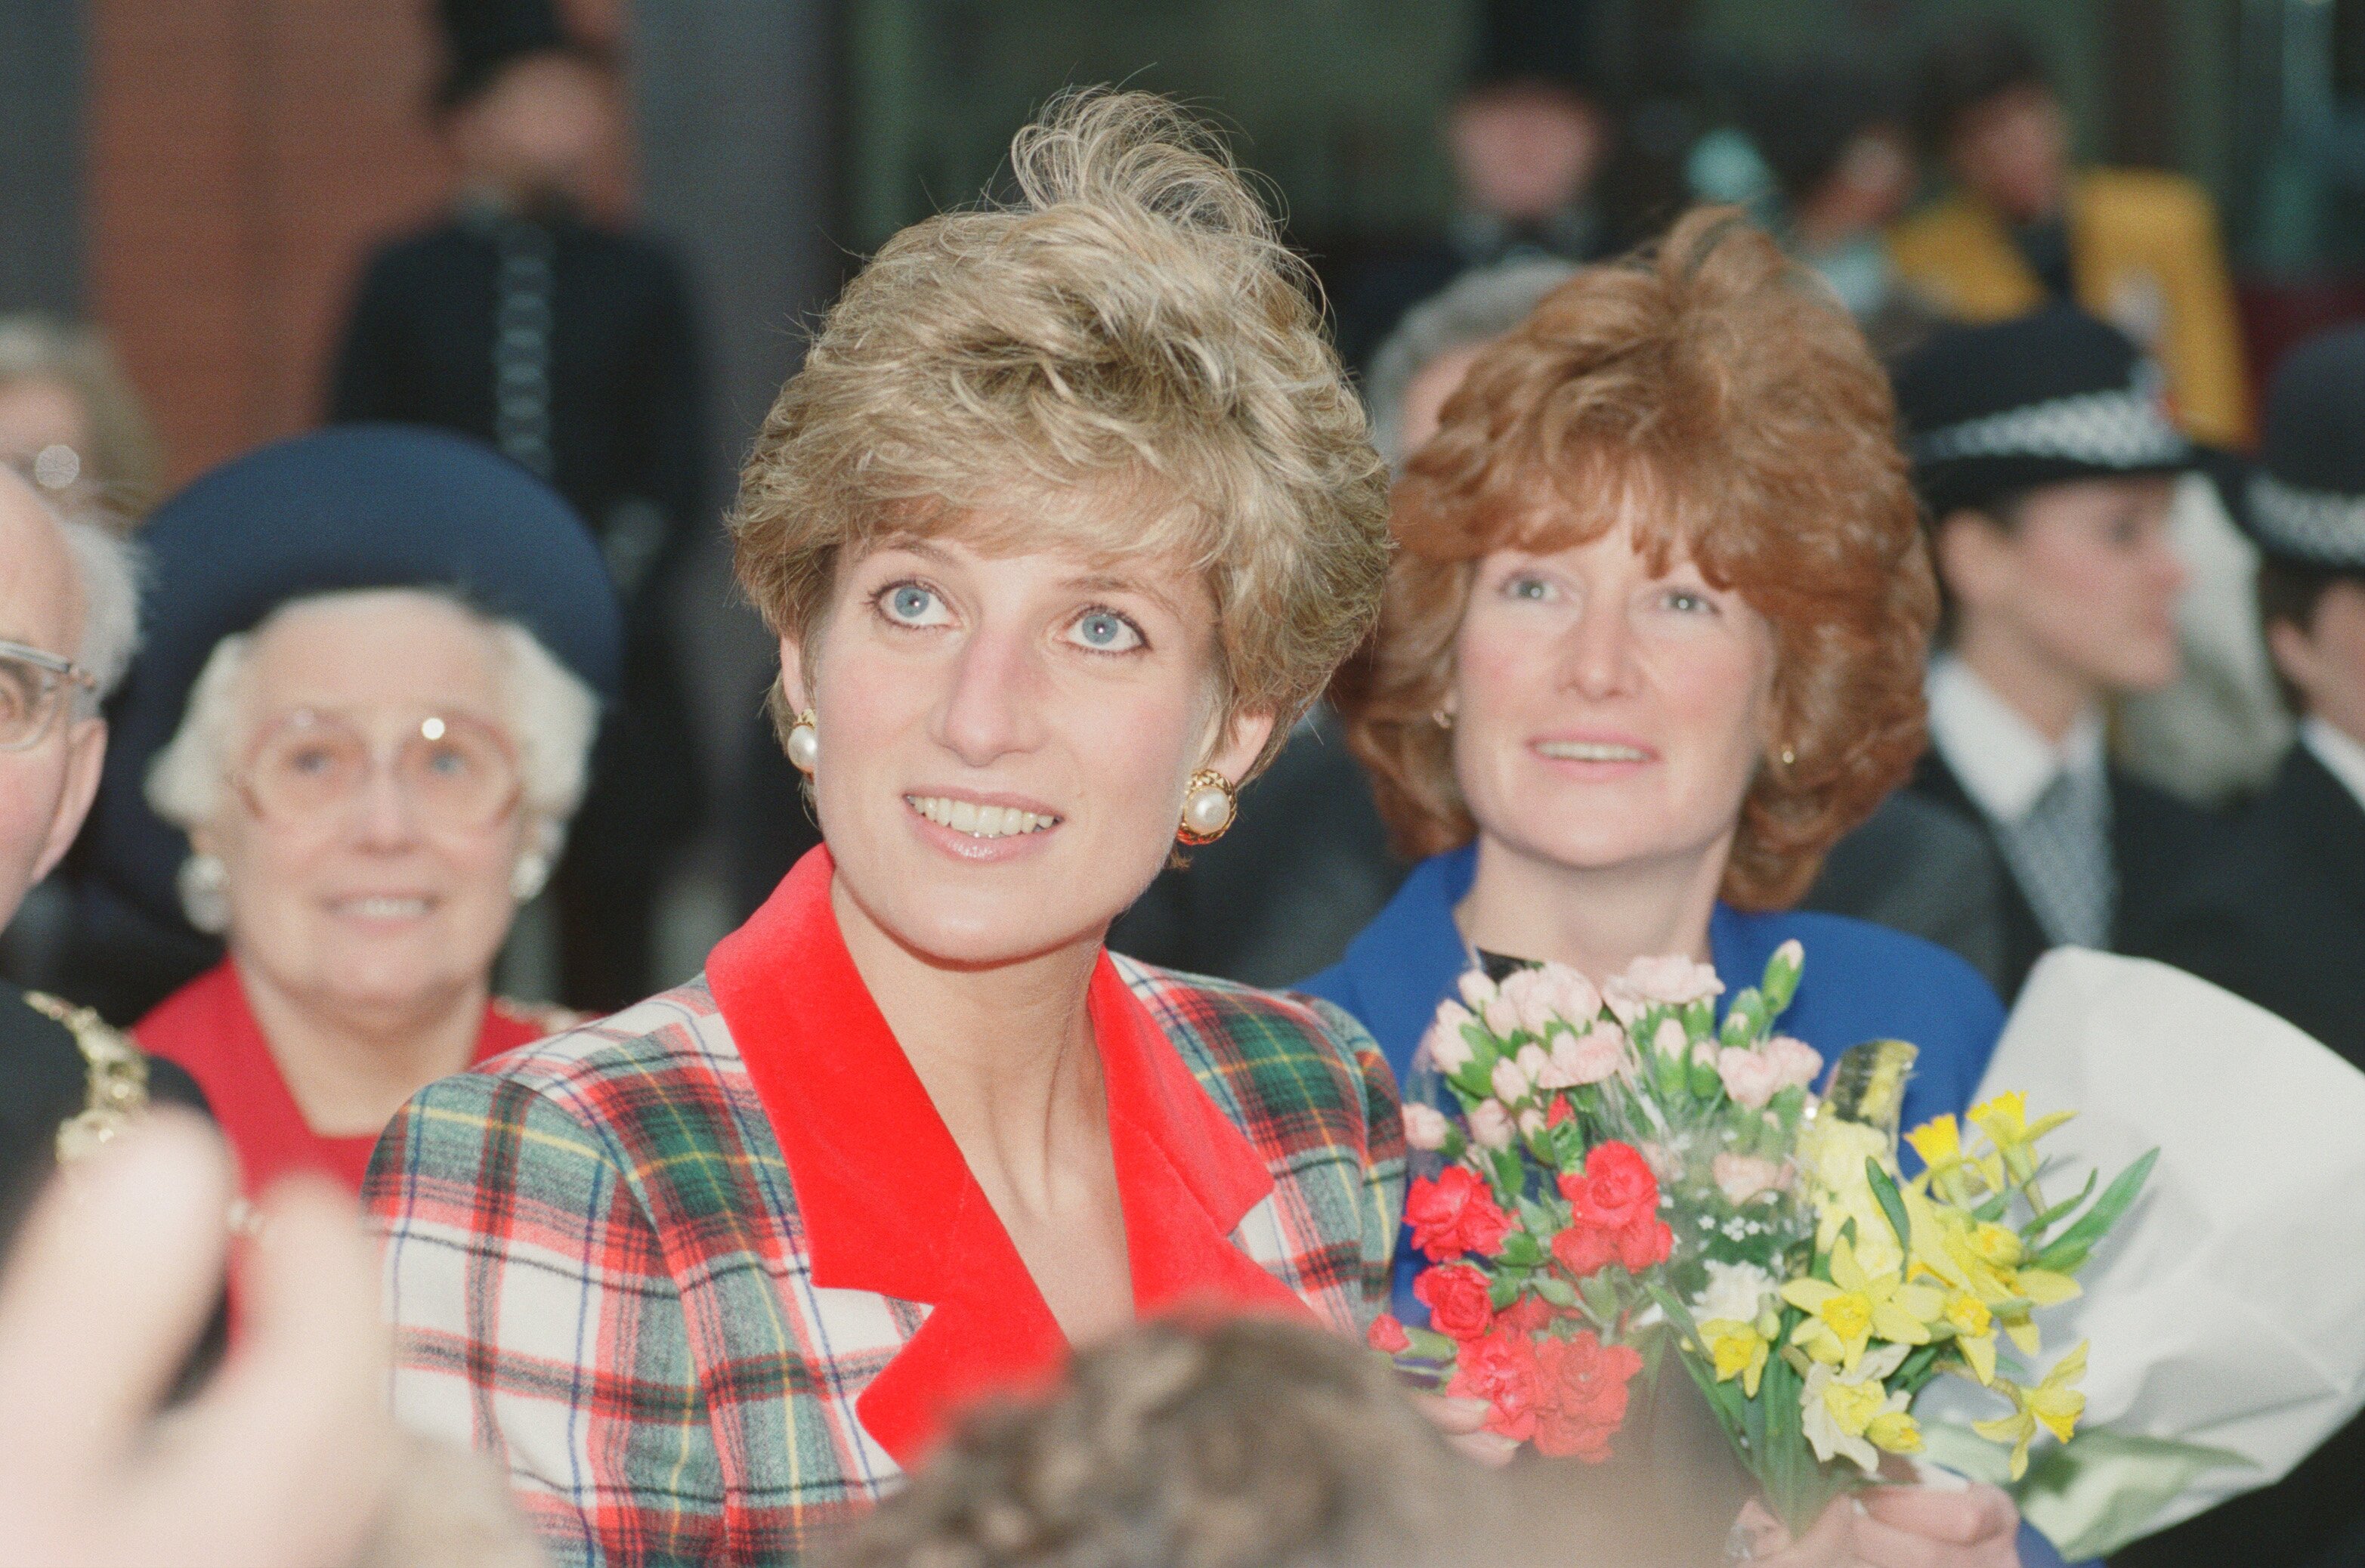 Princess Diana dressed in a plaid suit during an event with her sister Lady Sarah McCorquodale